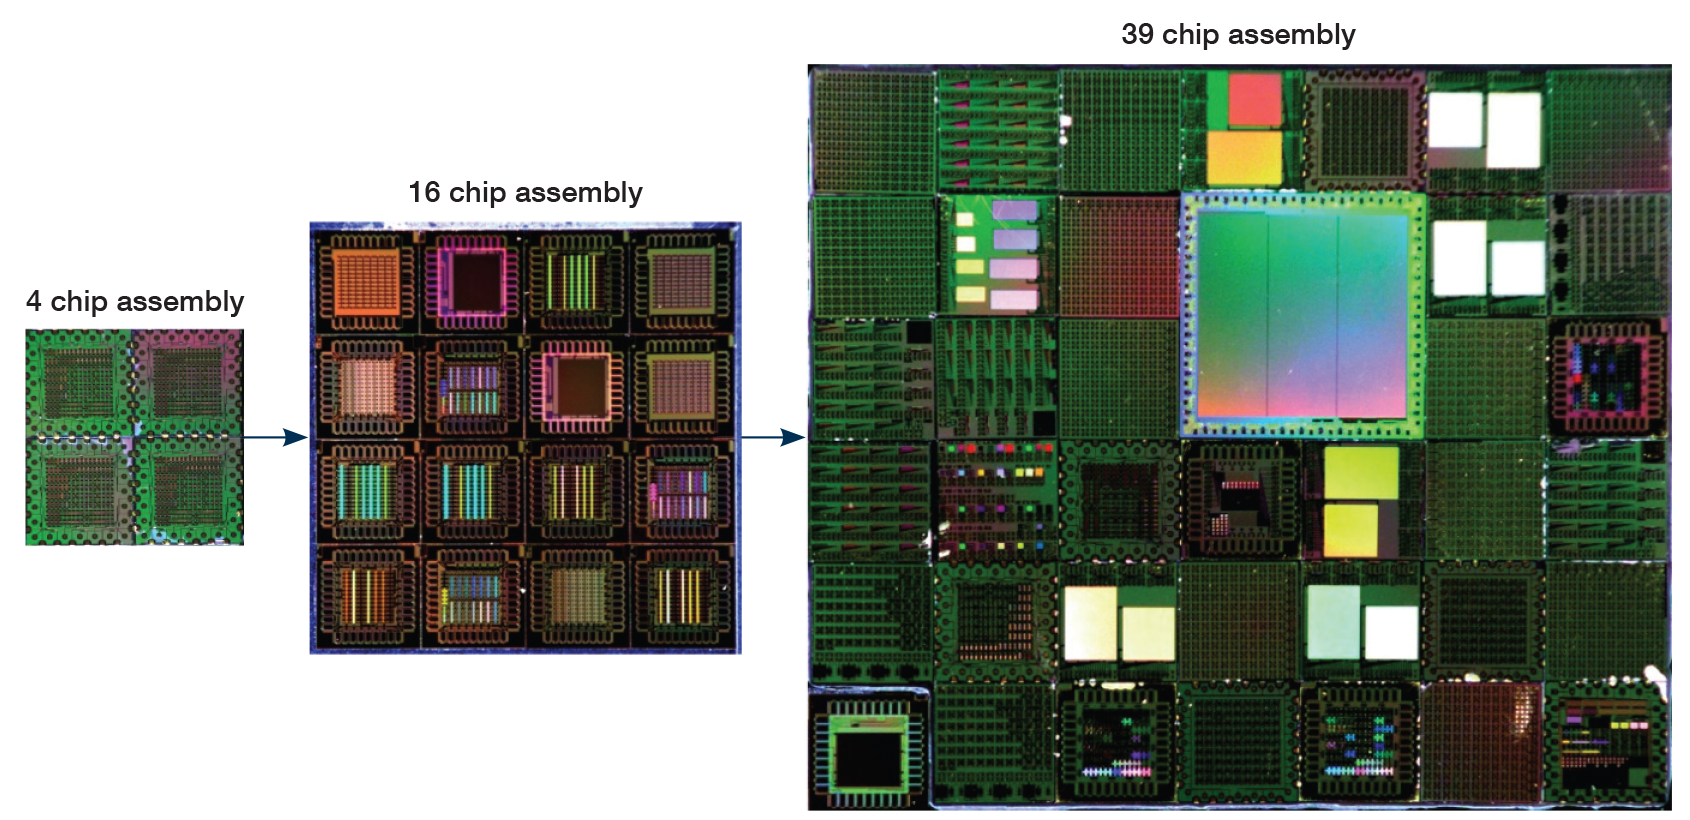 Images show 3 large-area integrated circuits composed respectively of 4, 16, and 39 chips.